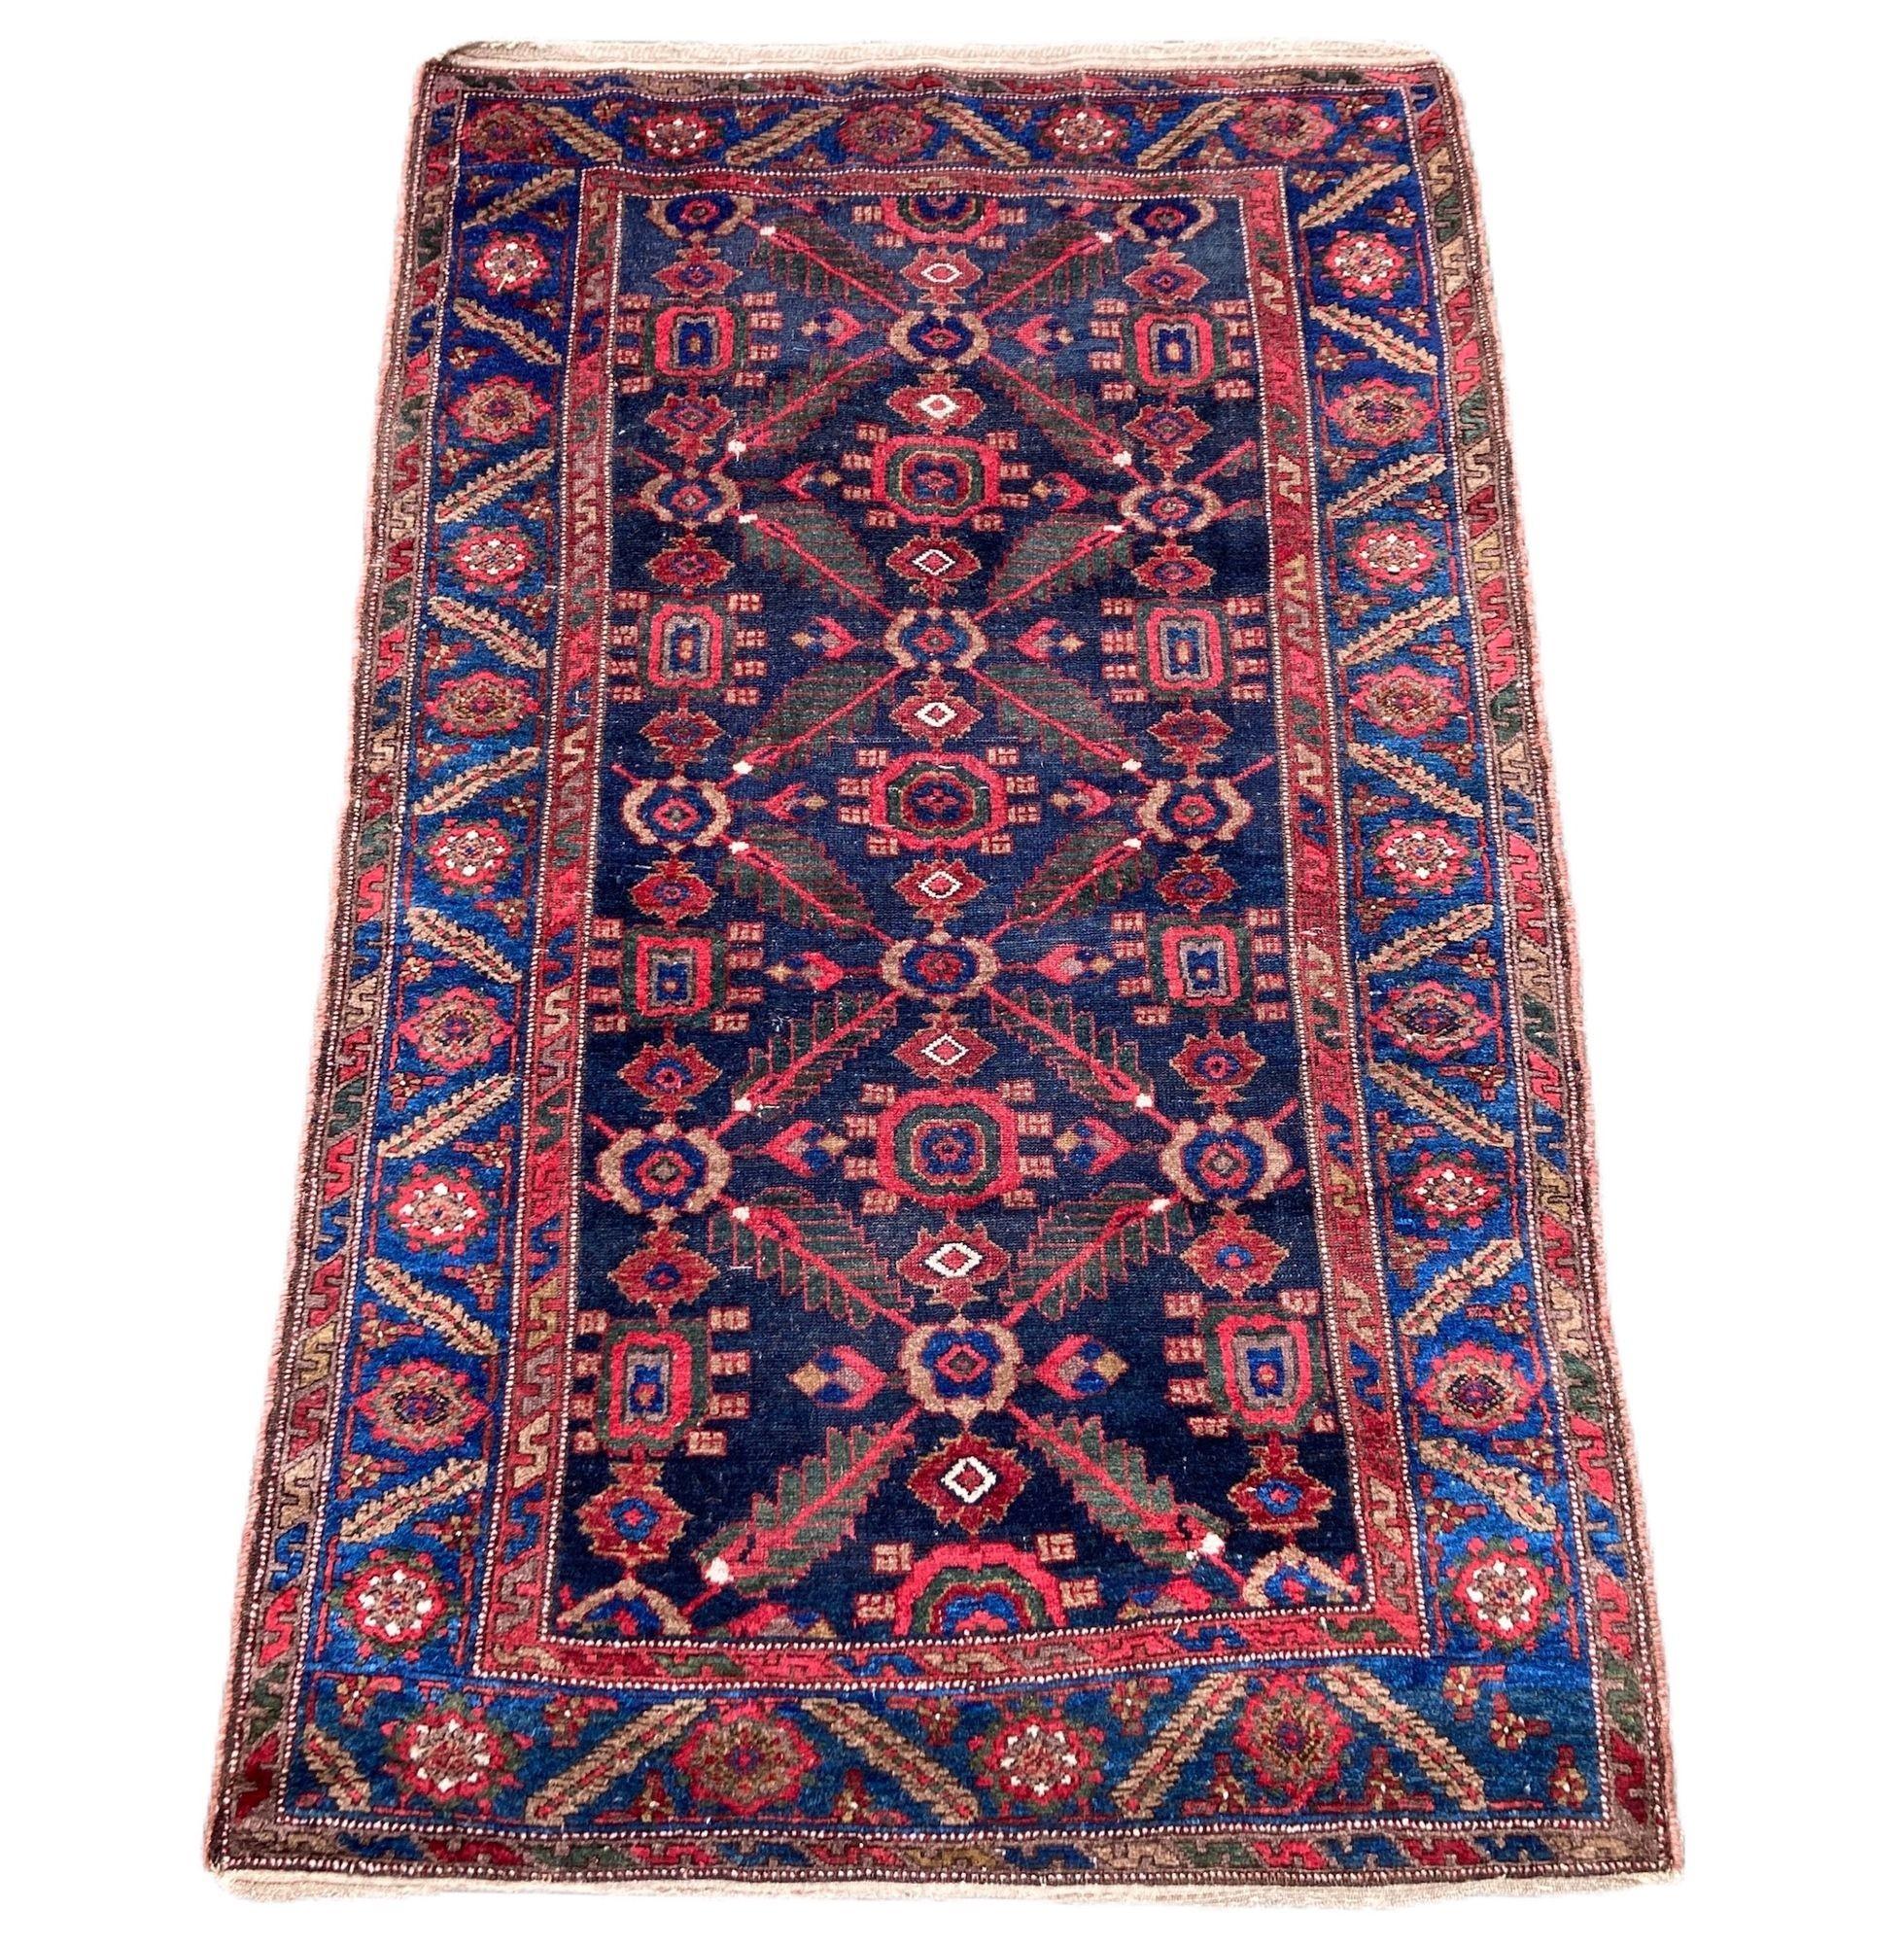 A lovely antique Kurdish rug, hand woven circa 1910 featuring an all over geometrical design of stylised flowers and vines on a deep indigo field. Fabulous wool quality and great secondary colours.
Size: 2.06m x 1.31m (6ft in x 4ft 7in)
This rug is